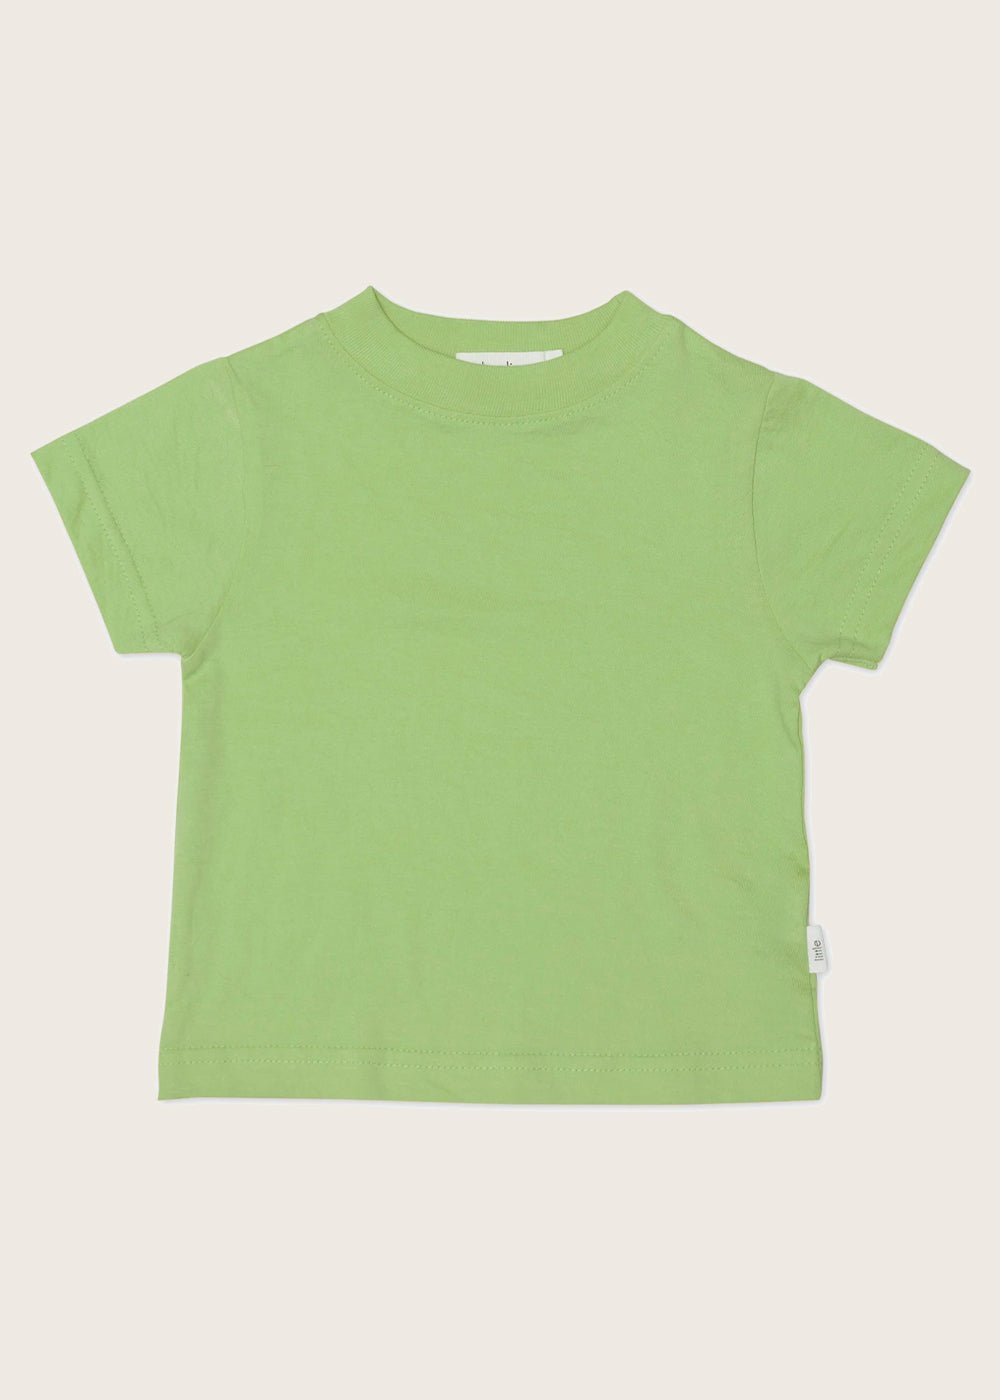 Little Elinor by NICO Sage Baby Tee - New Classics Studios Sustainable Ethical Fashion Canada